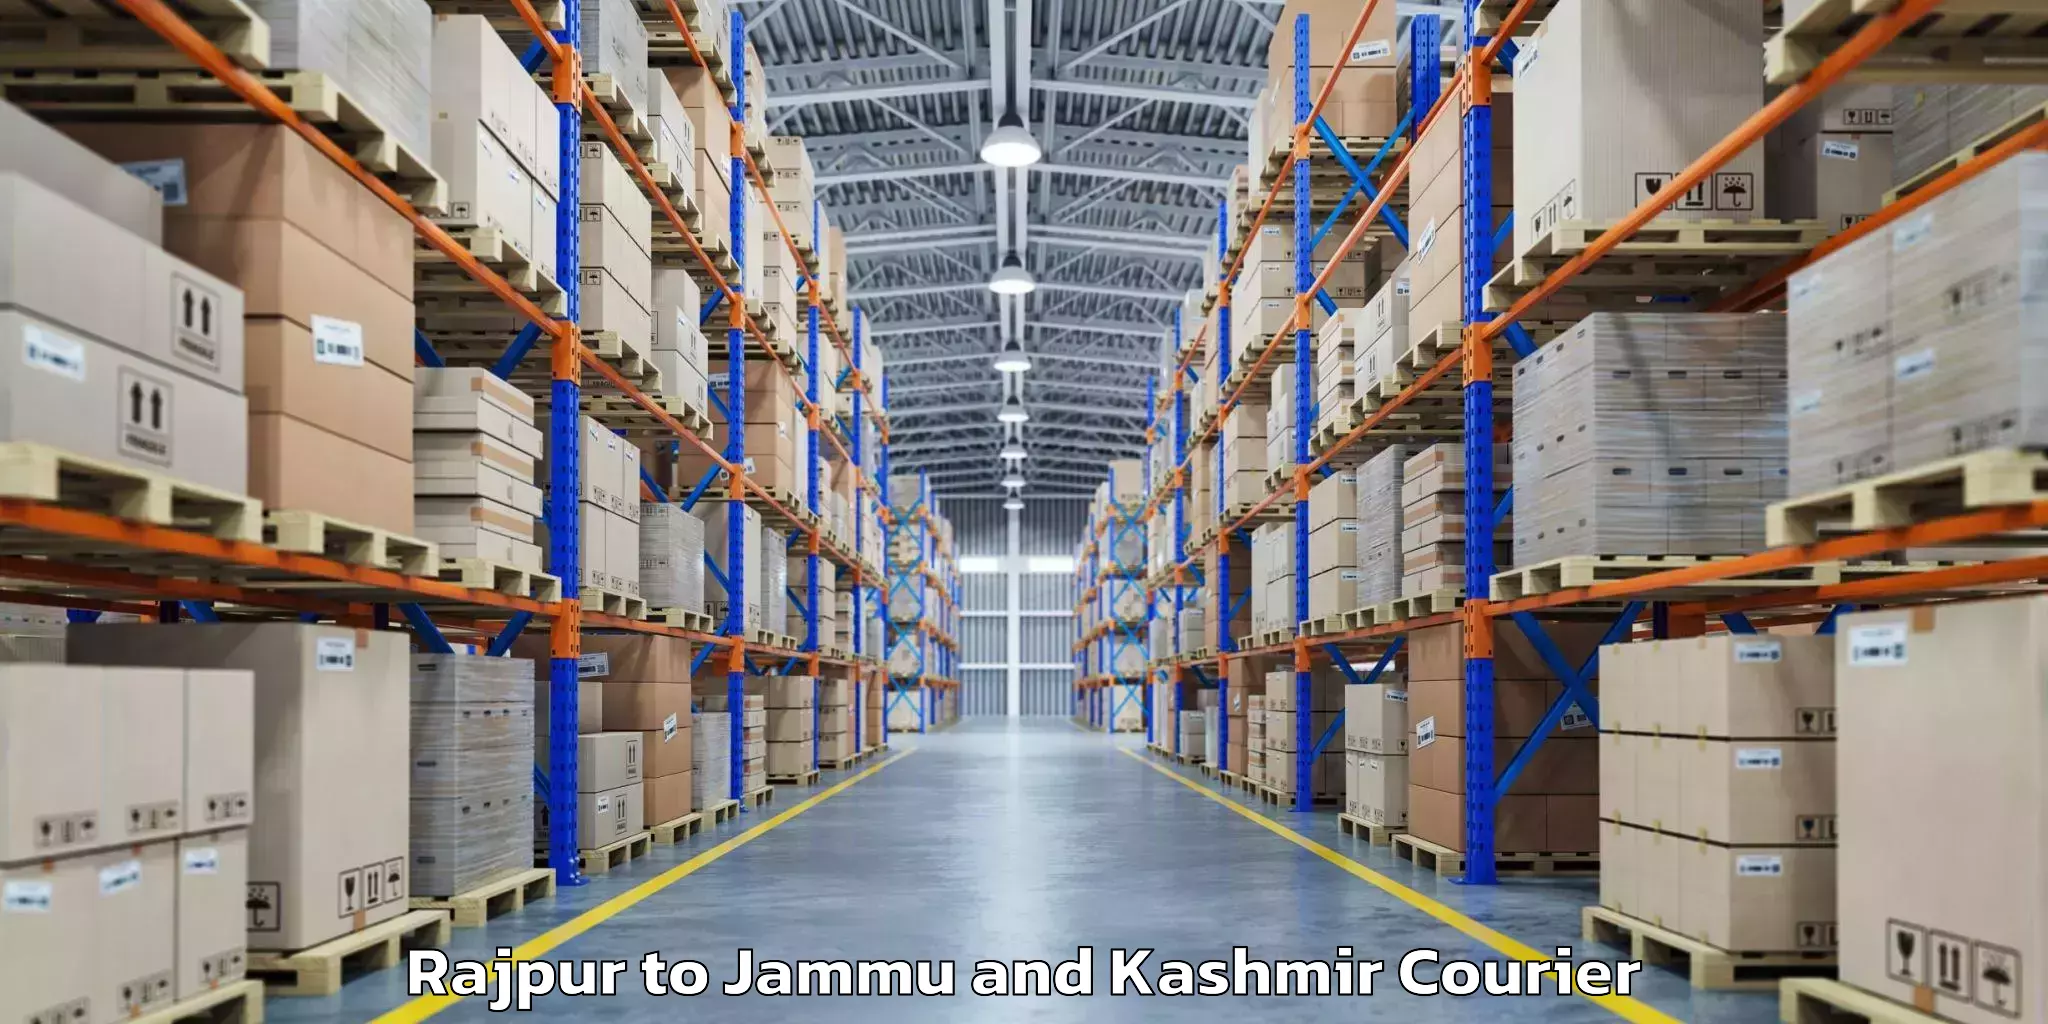 Luggage transport consultancy Rajpur to Jammu and Kashmir